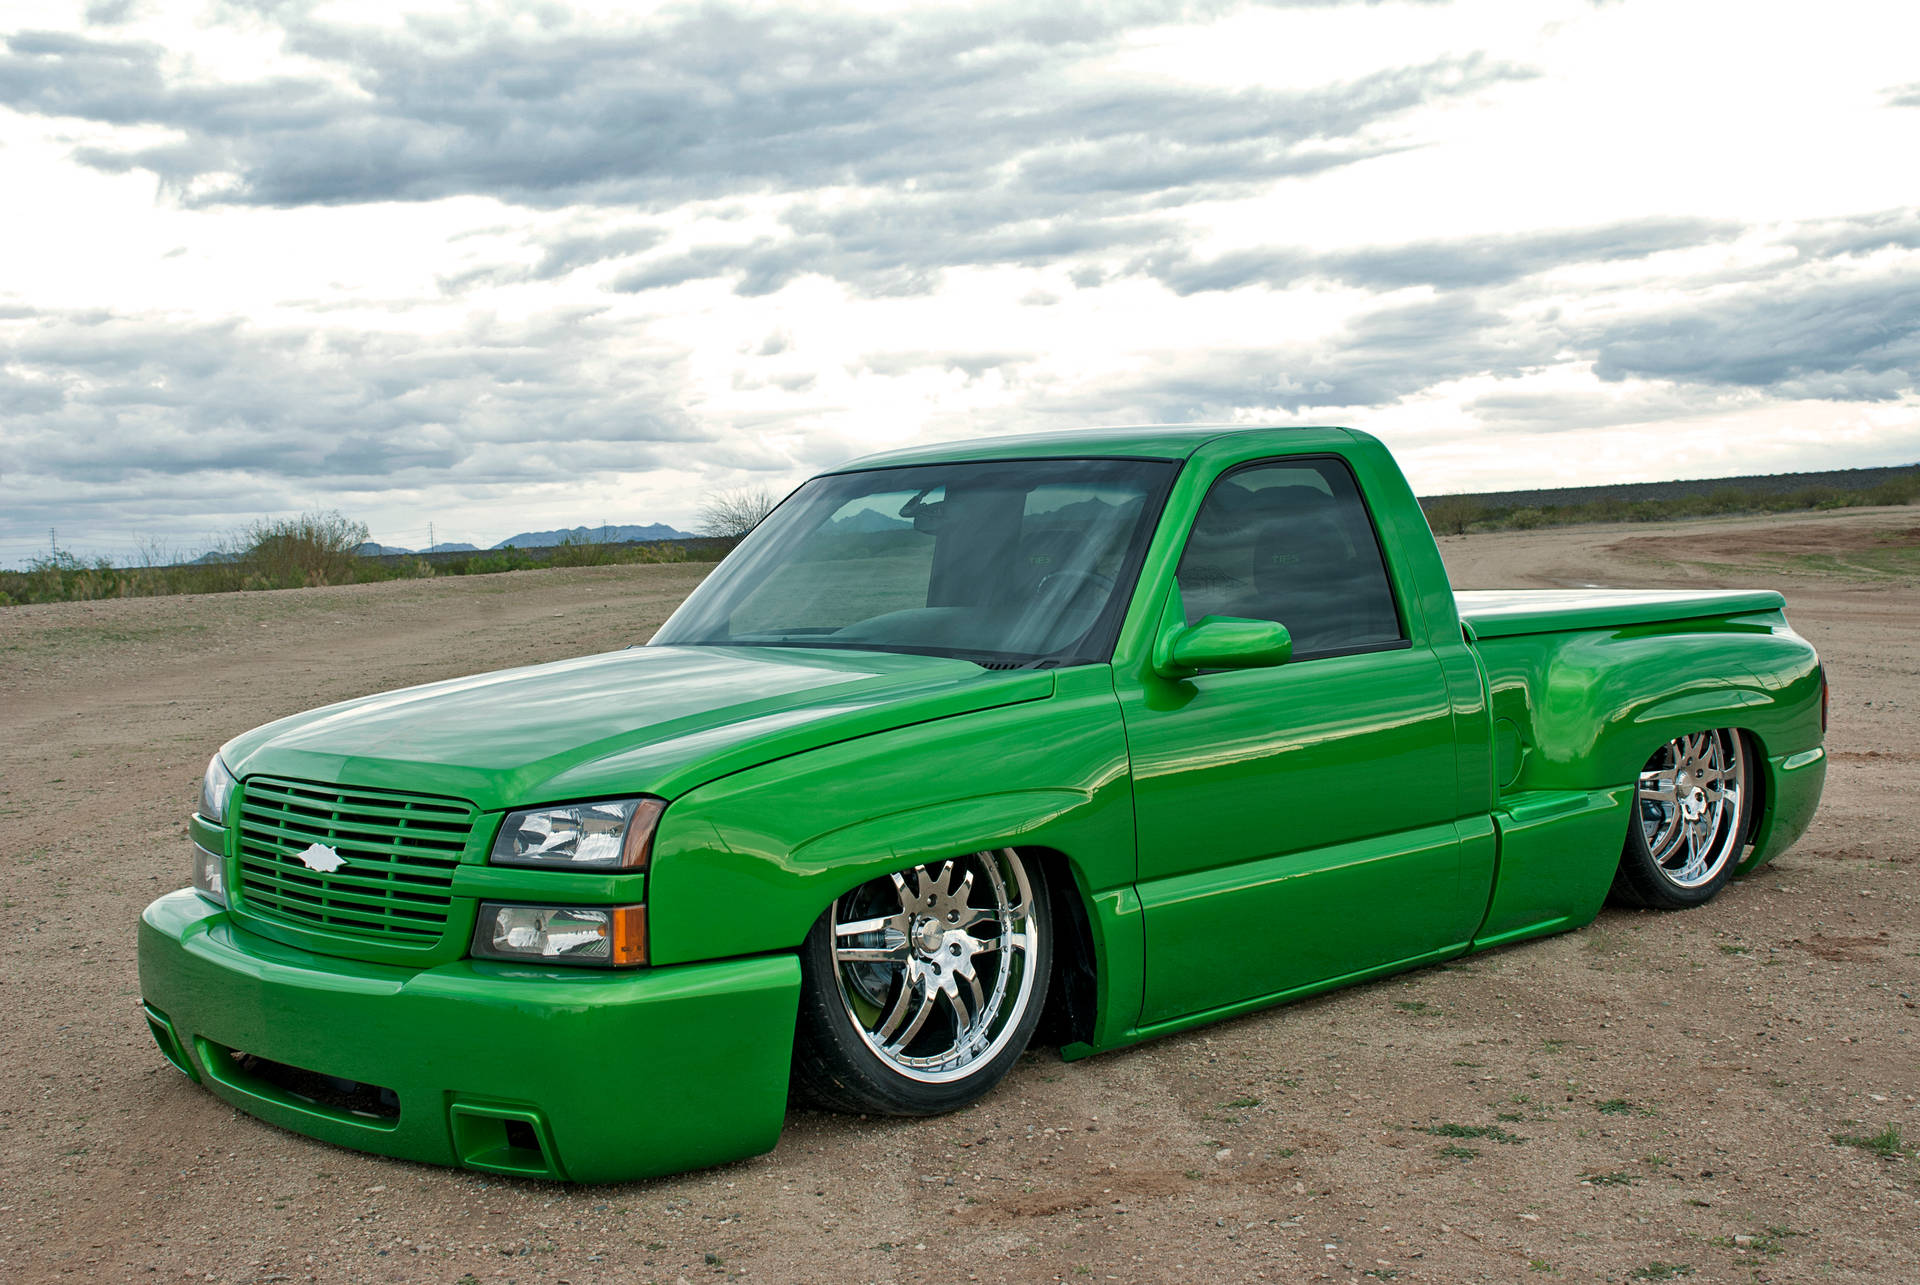 Parked Green Dropped Truck